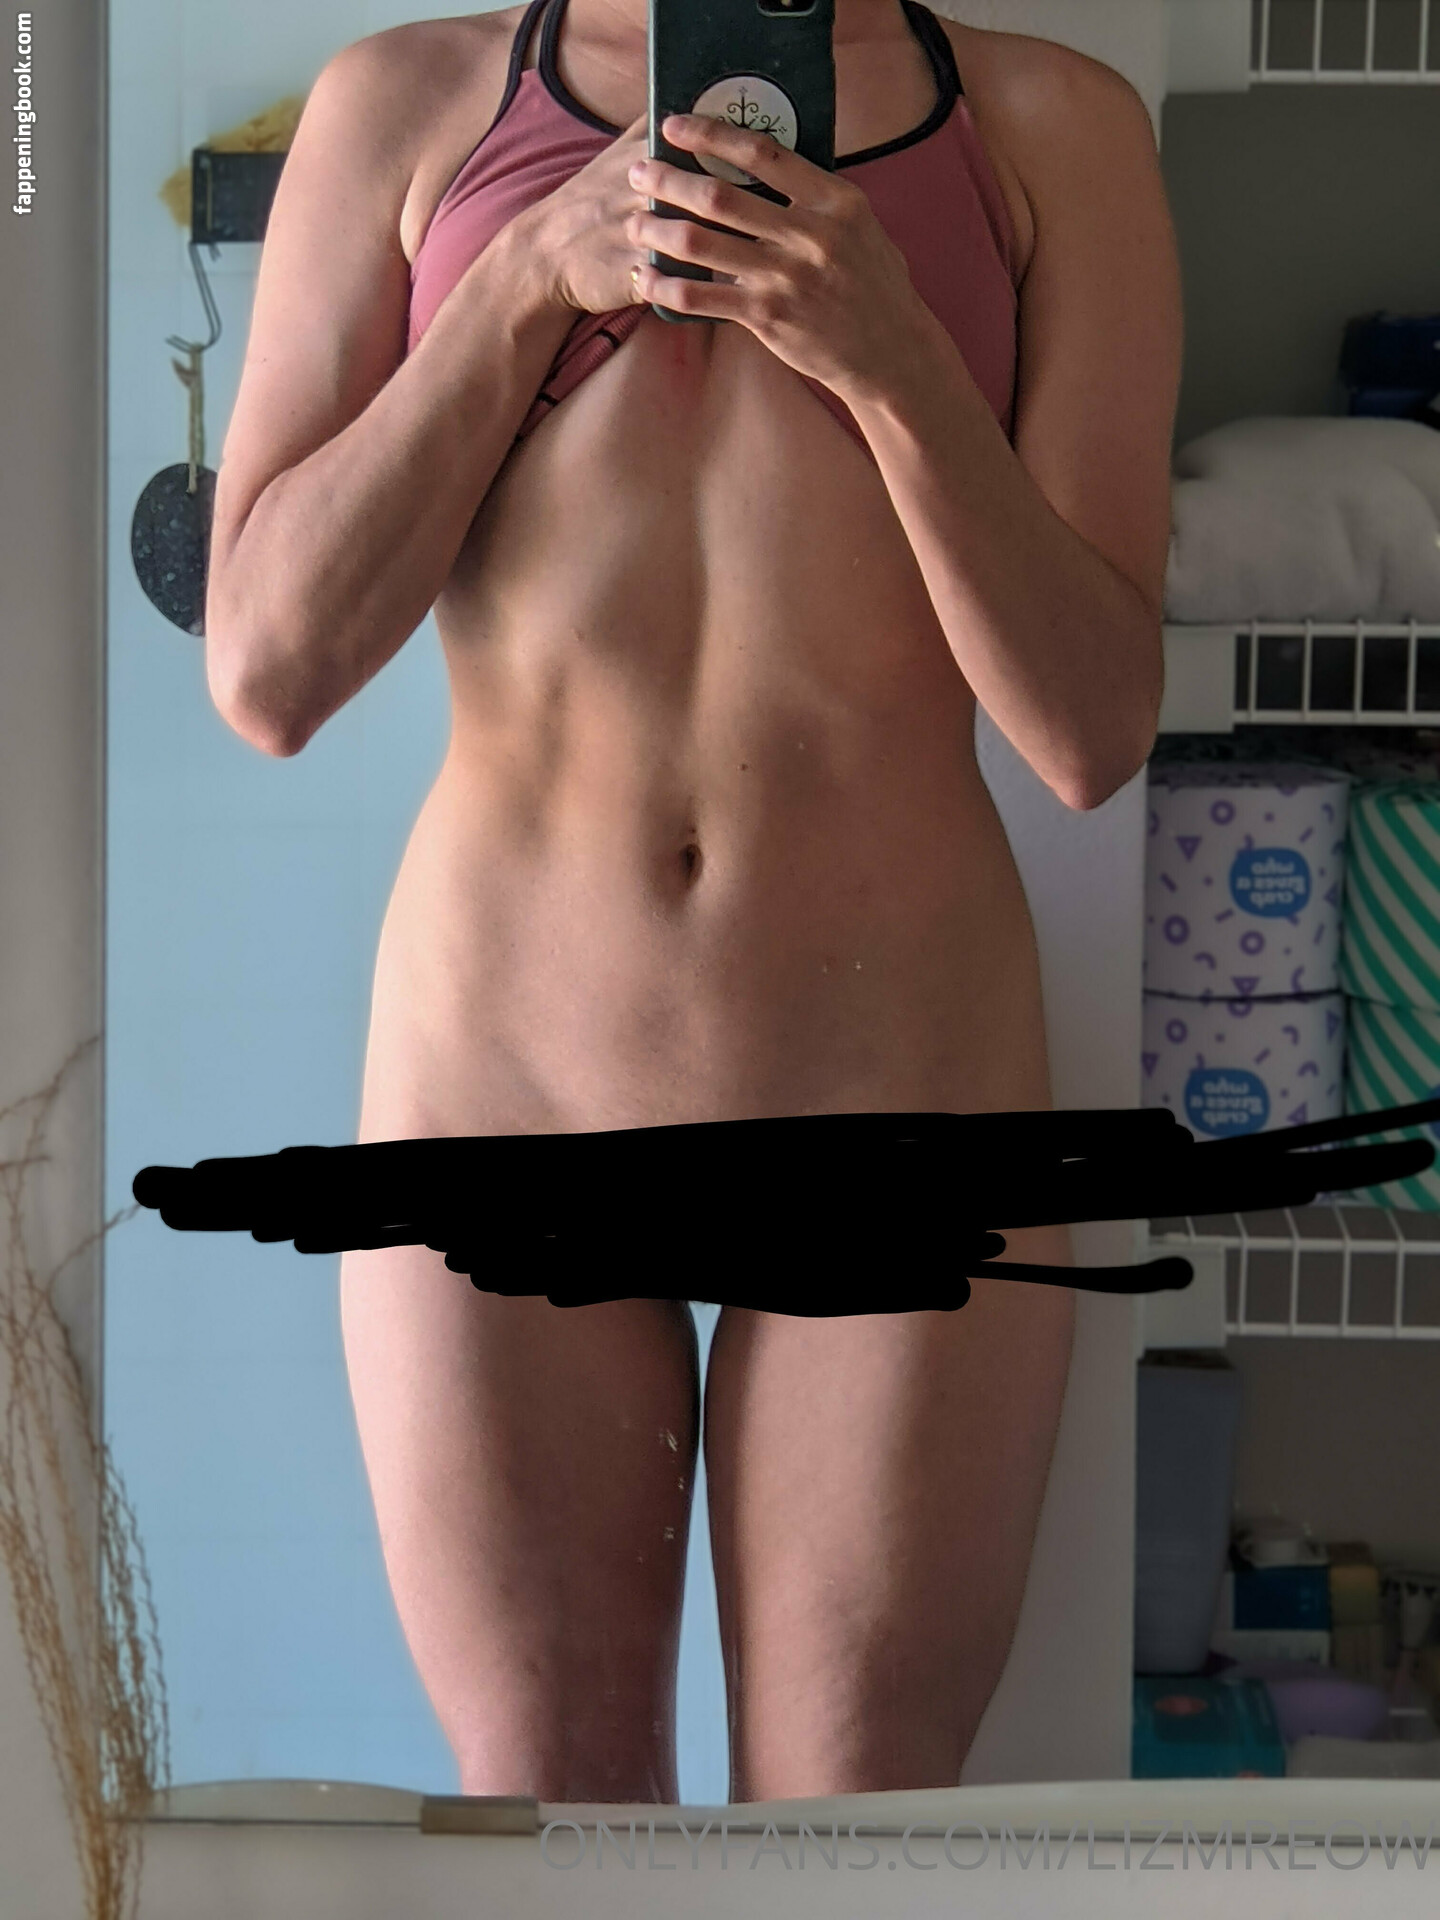 Lizmreow Nude OnlyFans Leaks